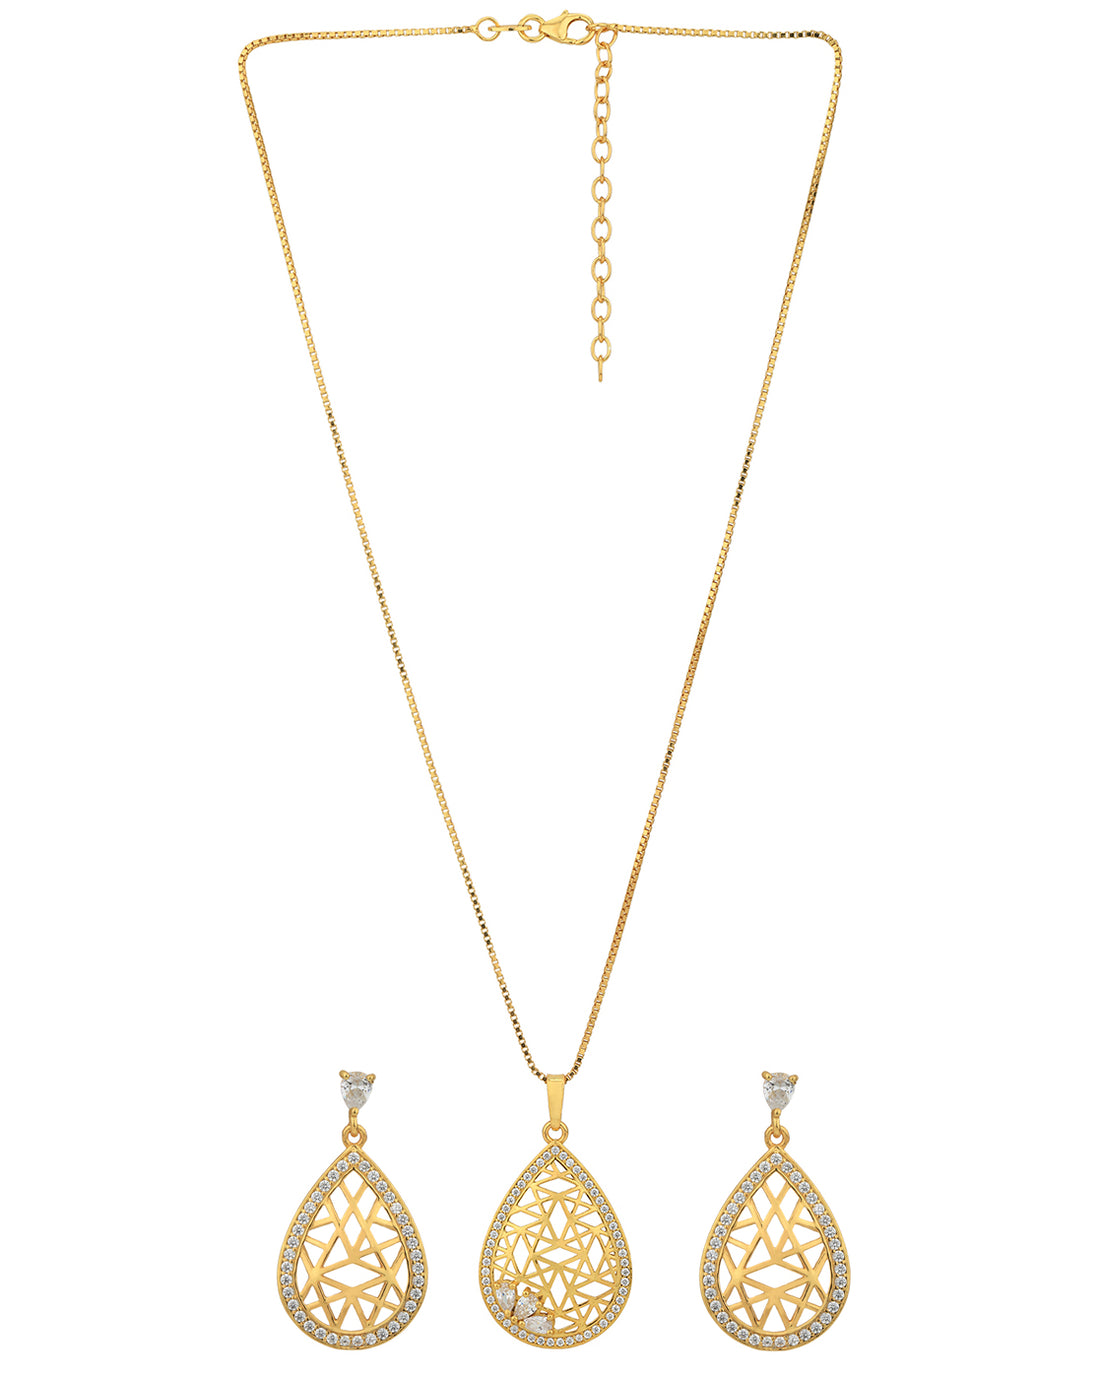 18kt Gold Plated with CZ Filigree Tear Drop Necklace and Earring set for women